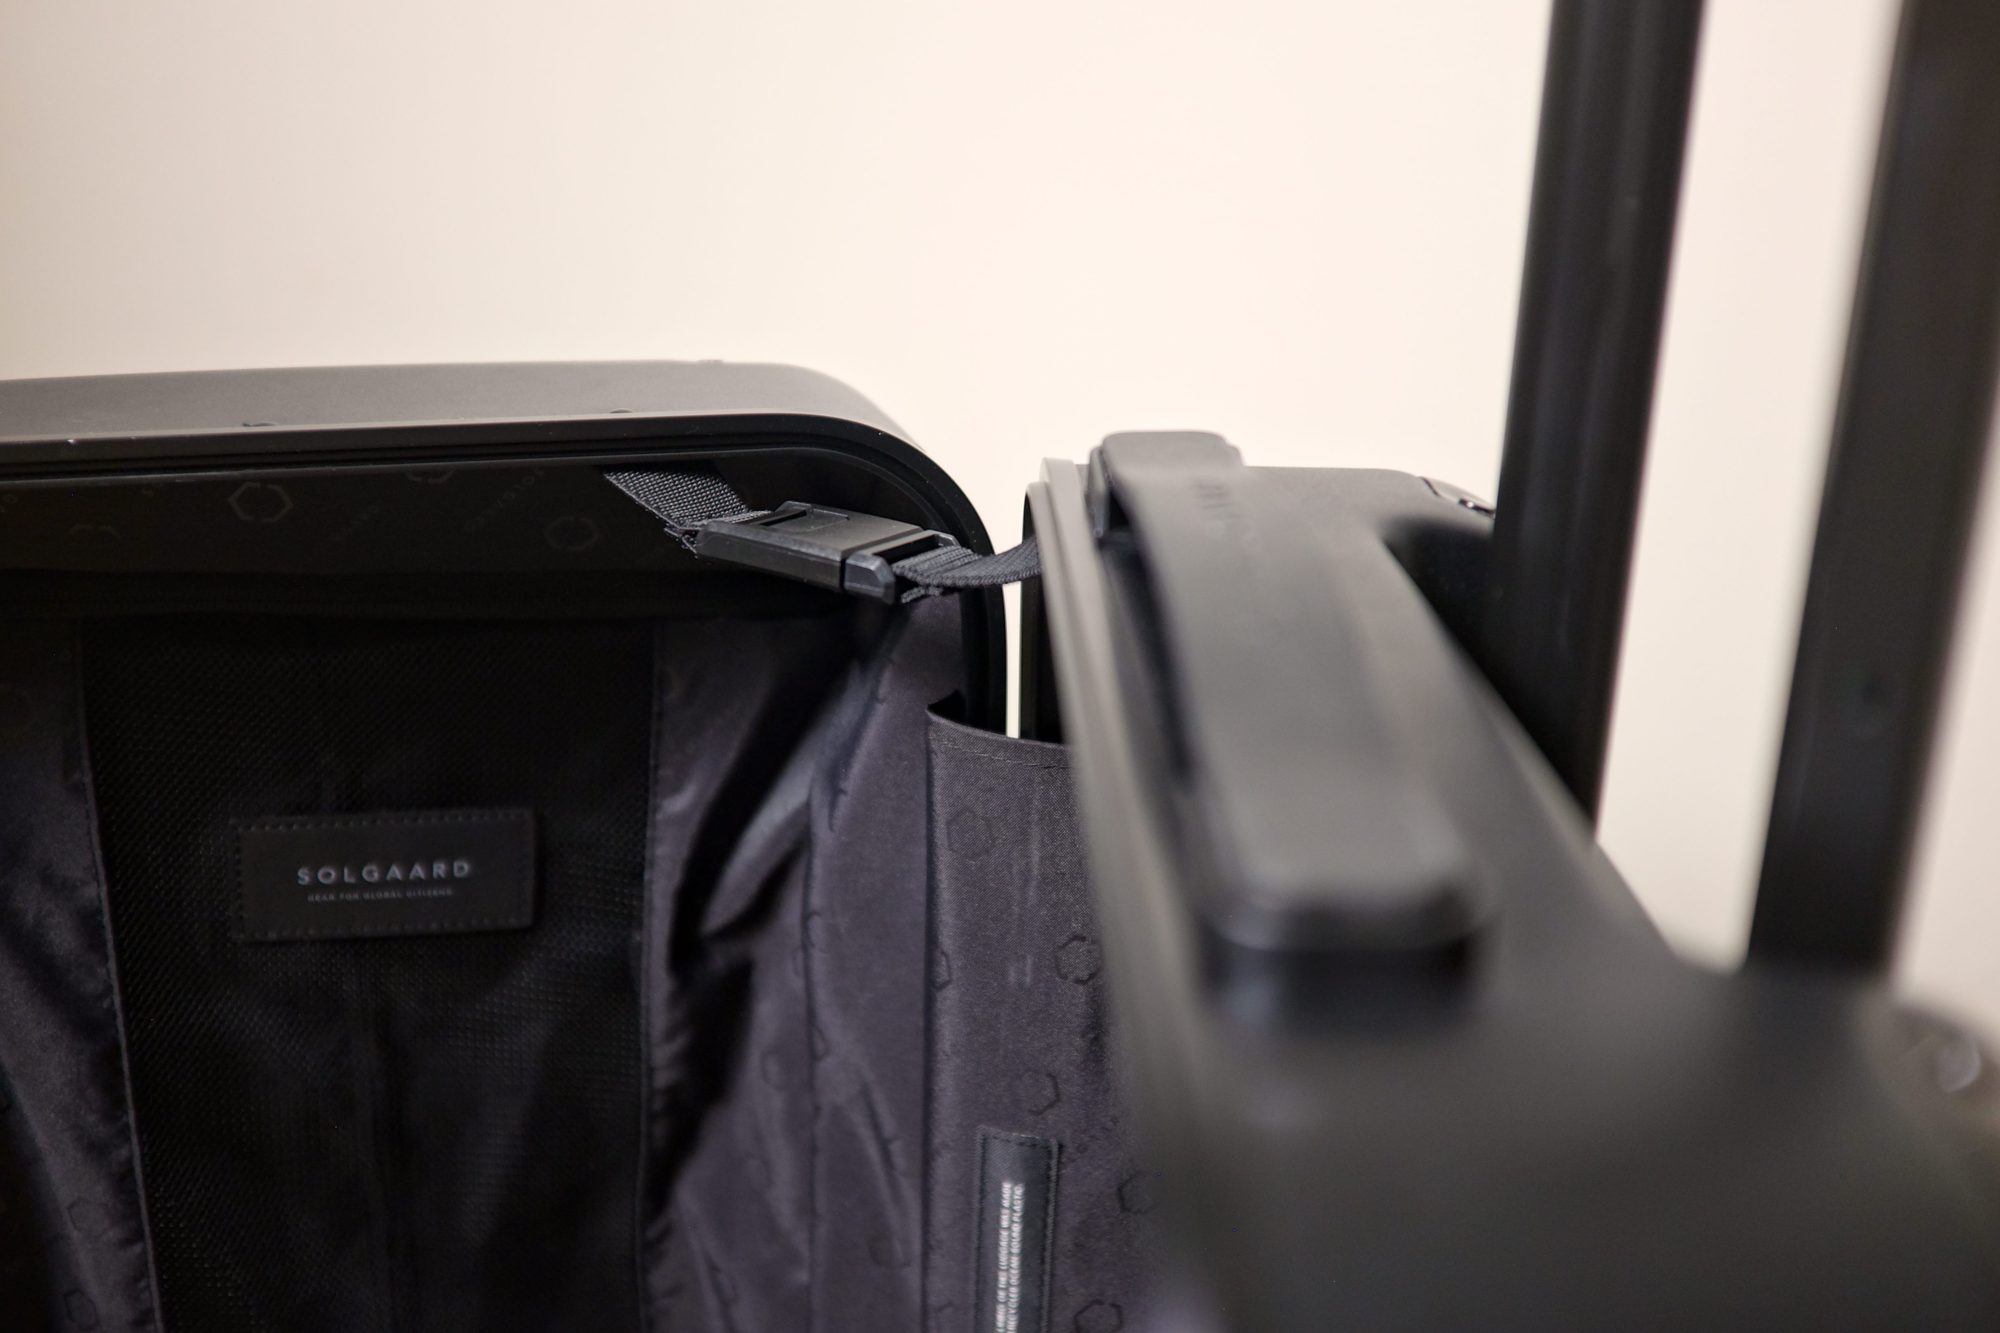 A Travel Blogger’s Review of the Solgaard Carry-On Closet | wayward